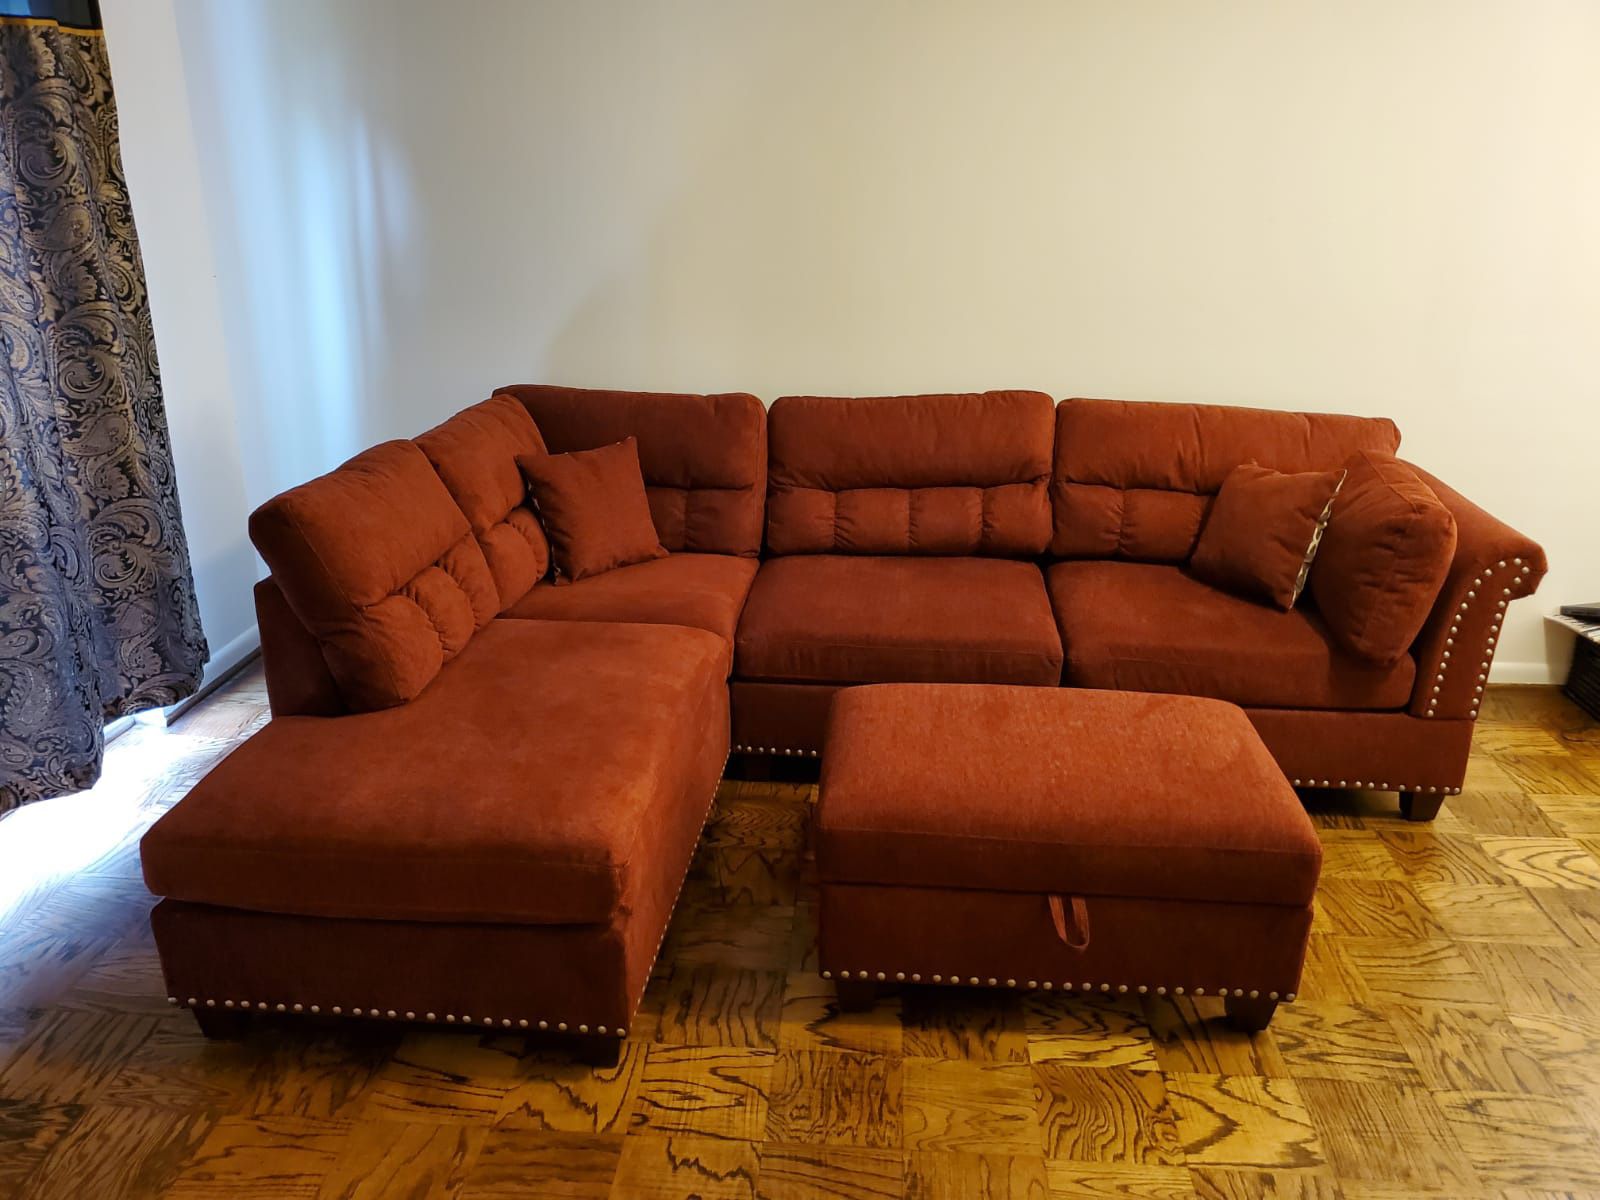 Red Velvet like Sectional Sofa with storage ottoman and 2 accent pillows. 